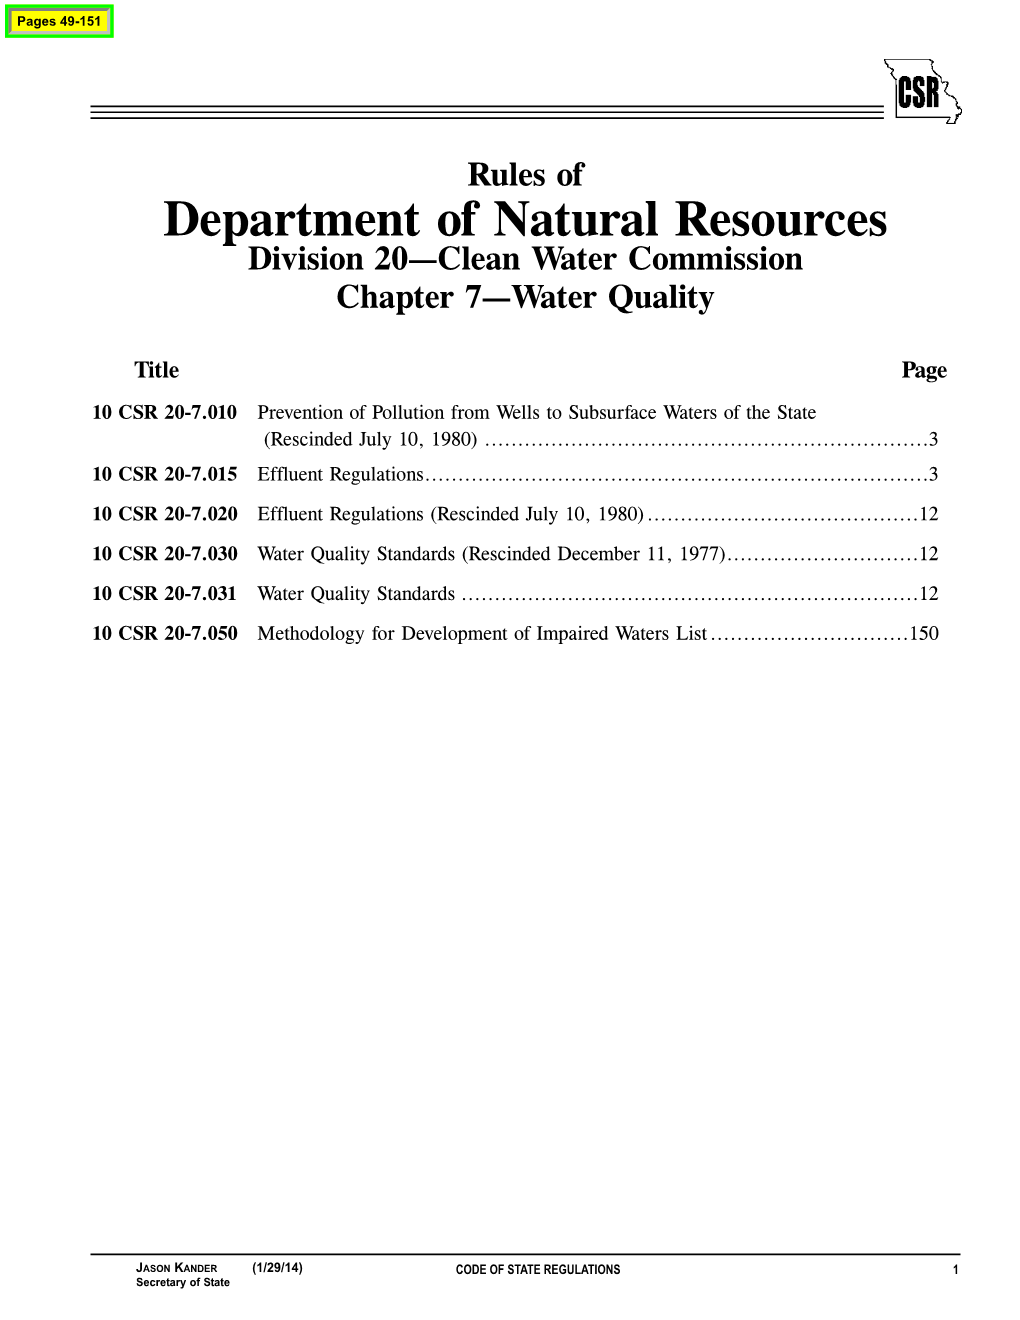 Department of Natural Resources Division 20—Clean Water Commission Chapter 7—Water Quality